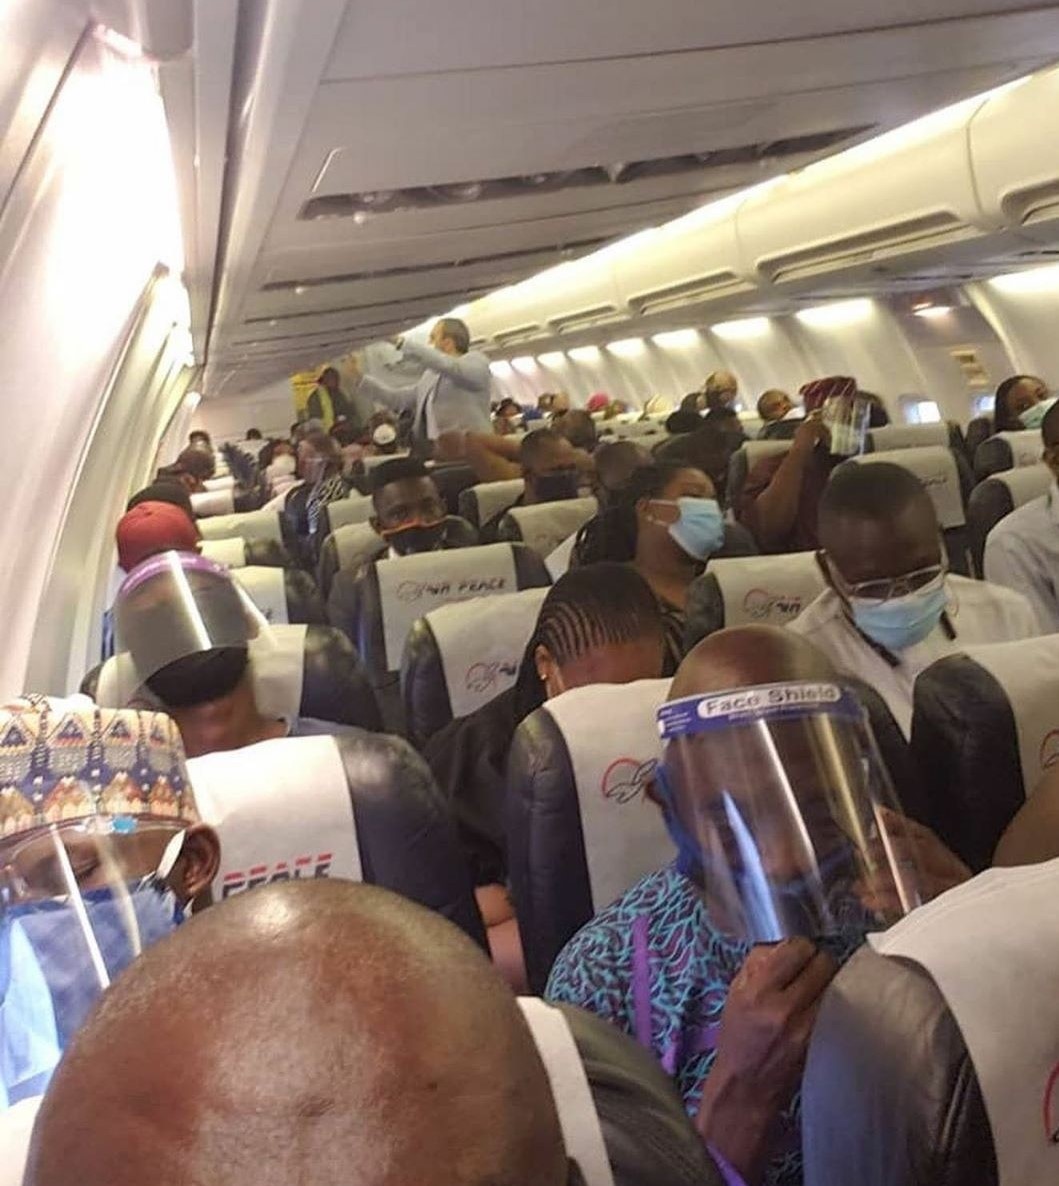 Why social distancing is not observed in airplanes – Hadi Sirika